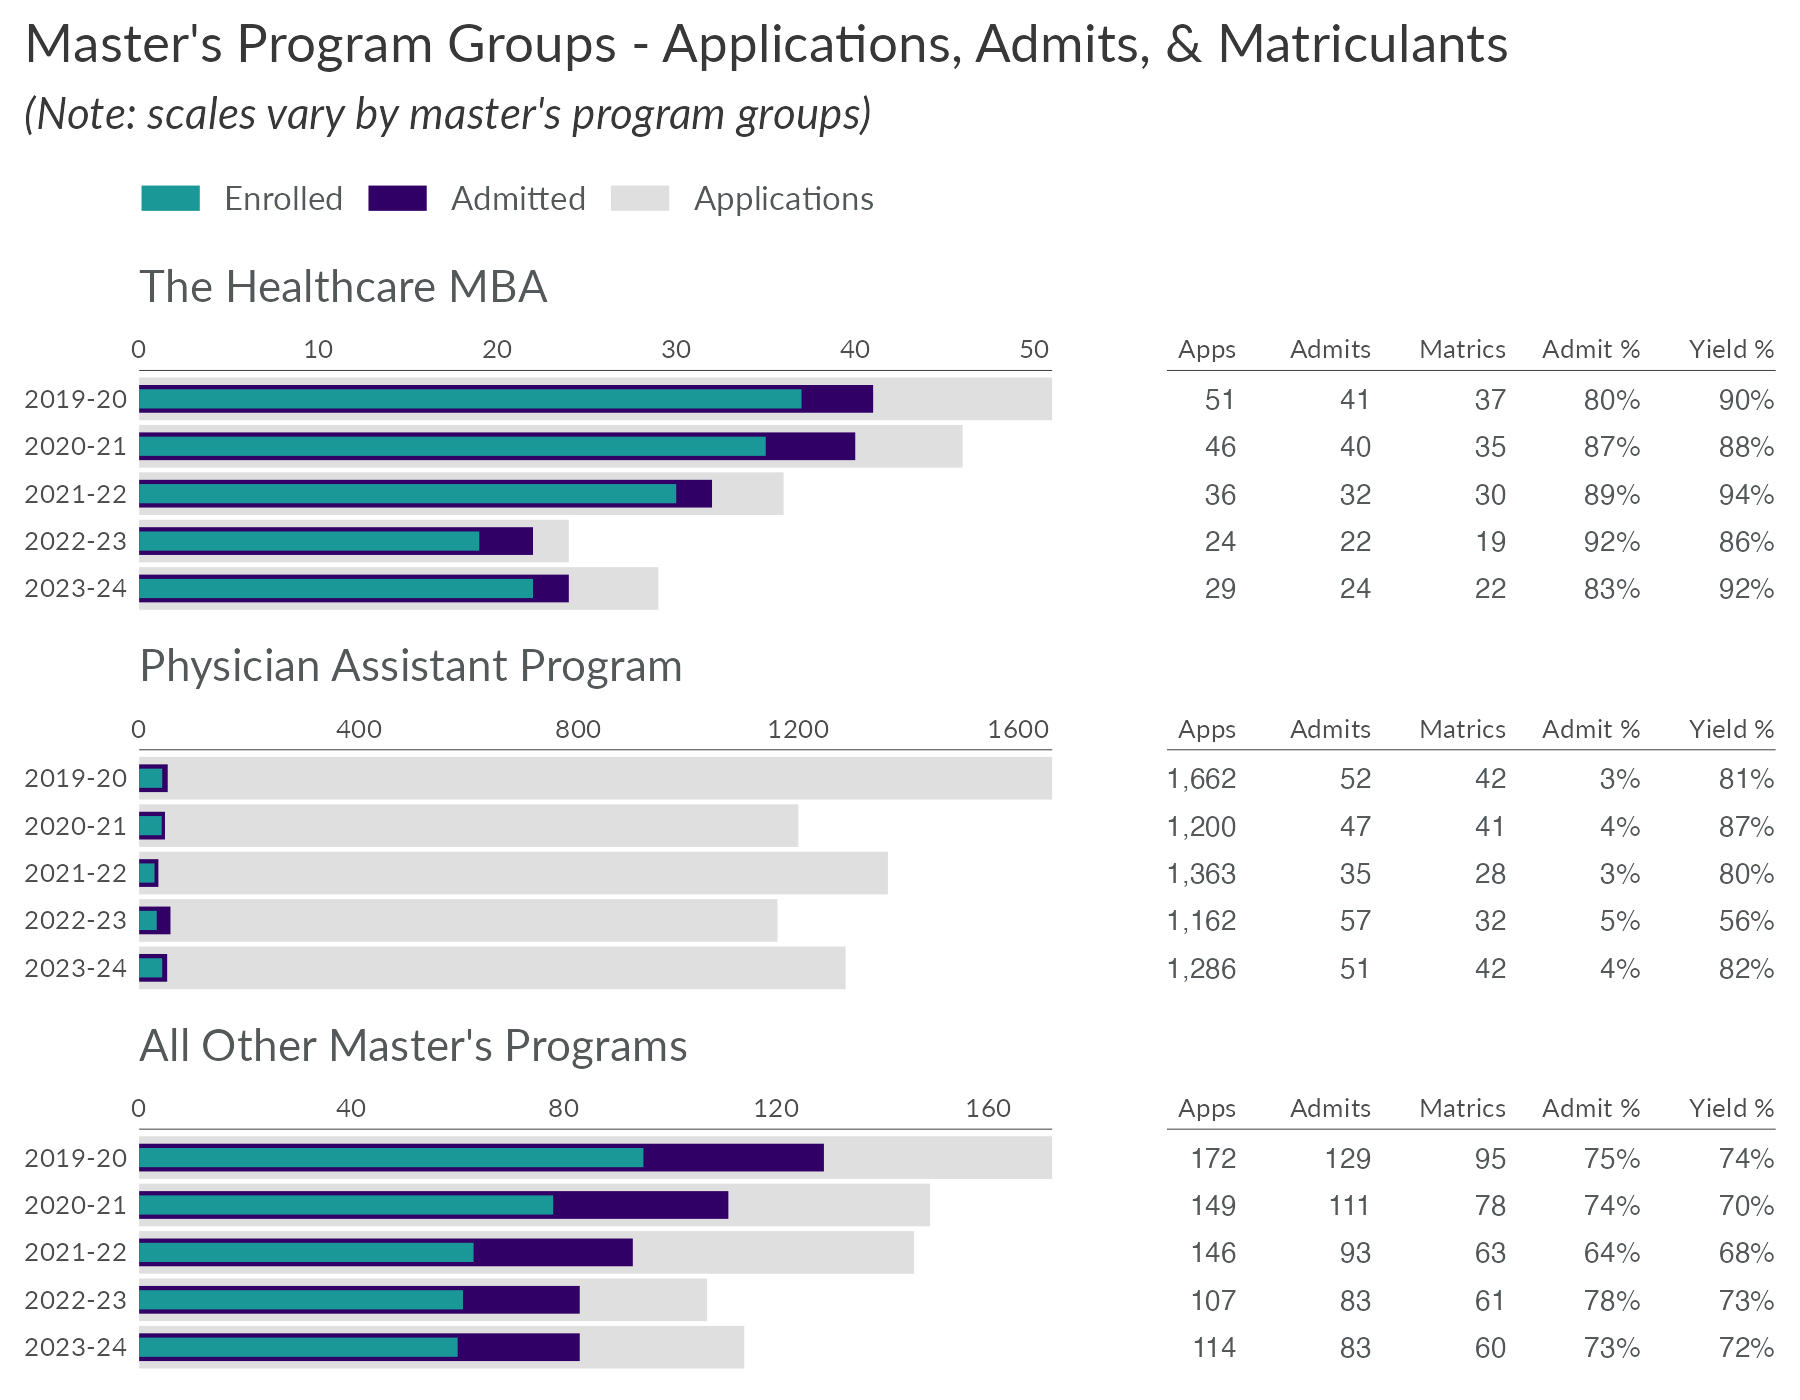 School of Medicine master's program admissions summary by year since academic year 2019-20. Five years shown.